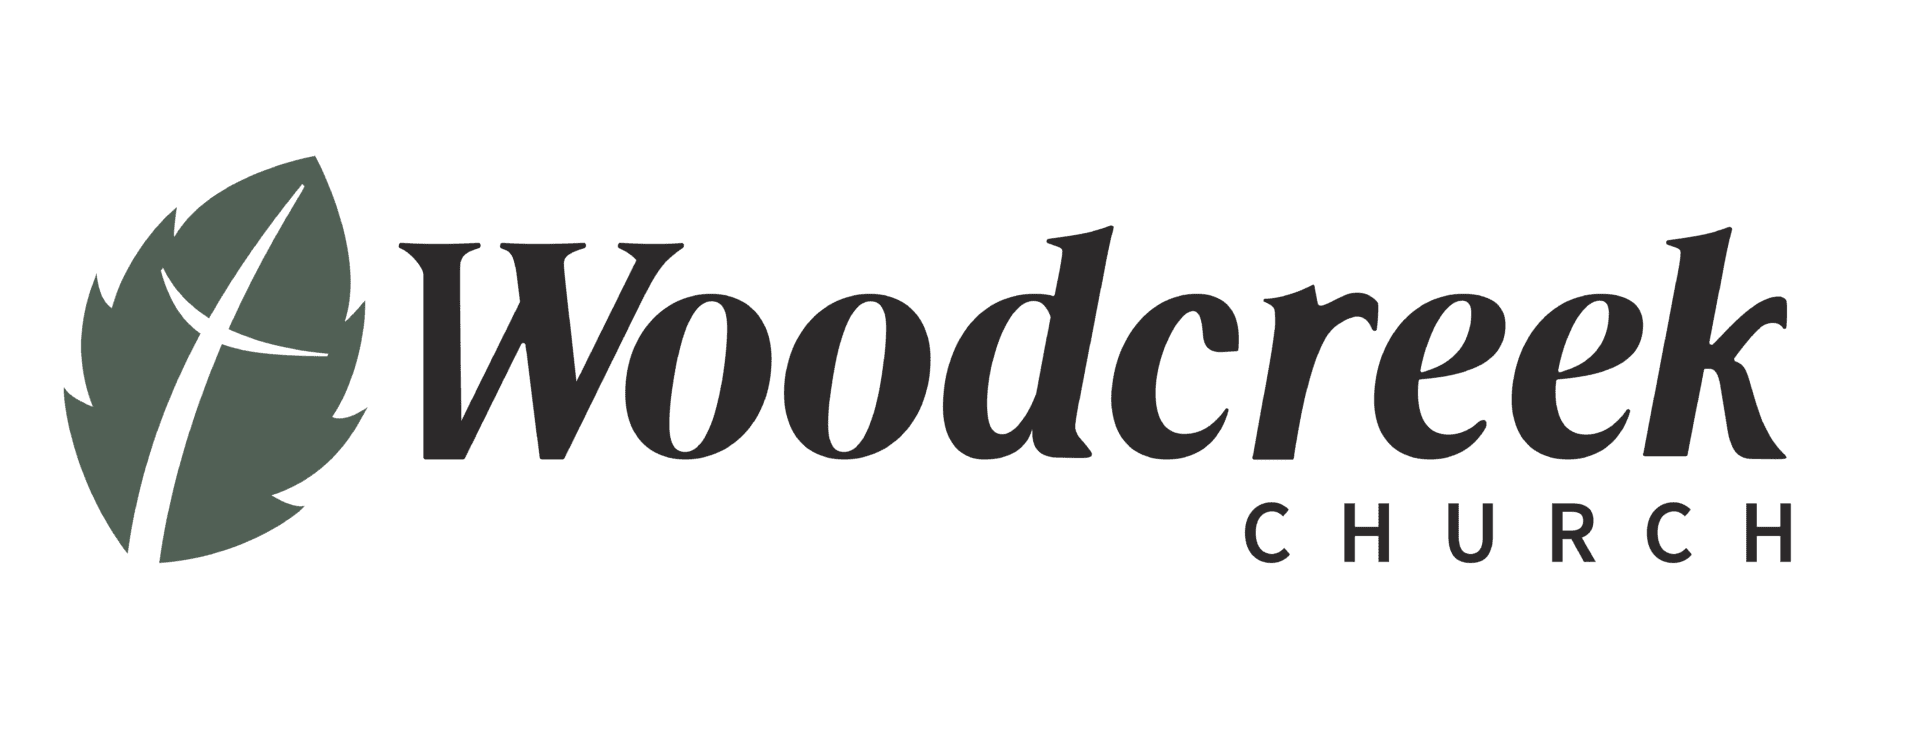 A green background with the word woodcraft written in black.